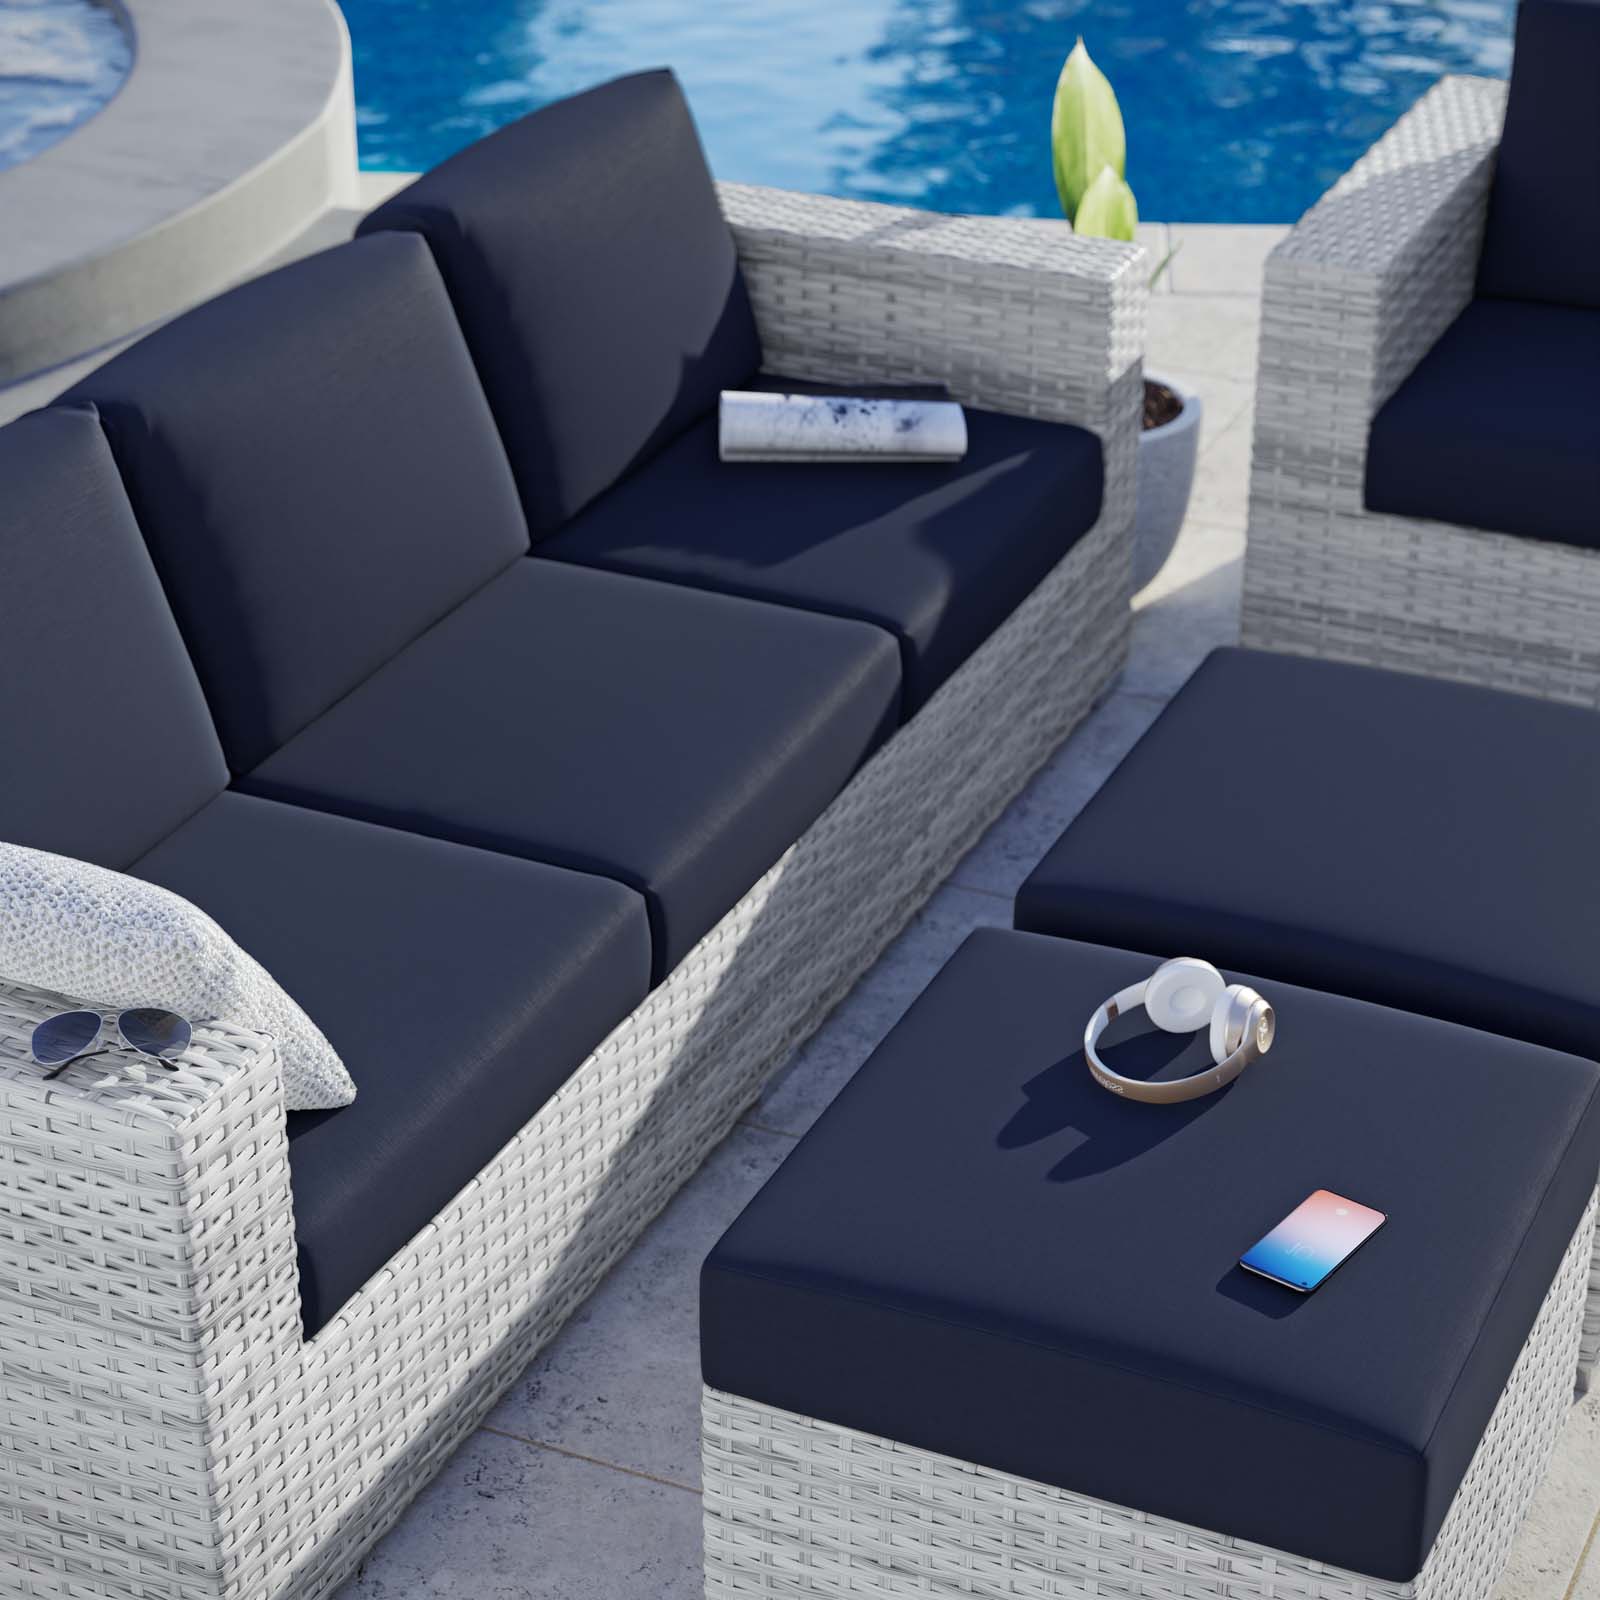 Lounge Sectional Sofa Chair Set, Rattan, Wicker, Light Grey Gray Blue Navy, Modern Contemporary Urban Design, Outdoor Patio Balcony Cafe Bistro Garden Furniture Hotel Hospitality - image 5 of 10